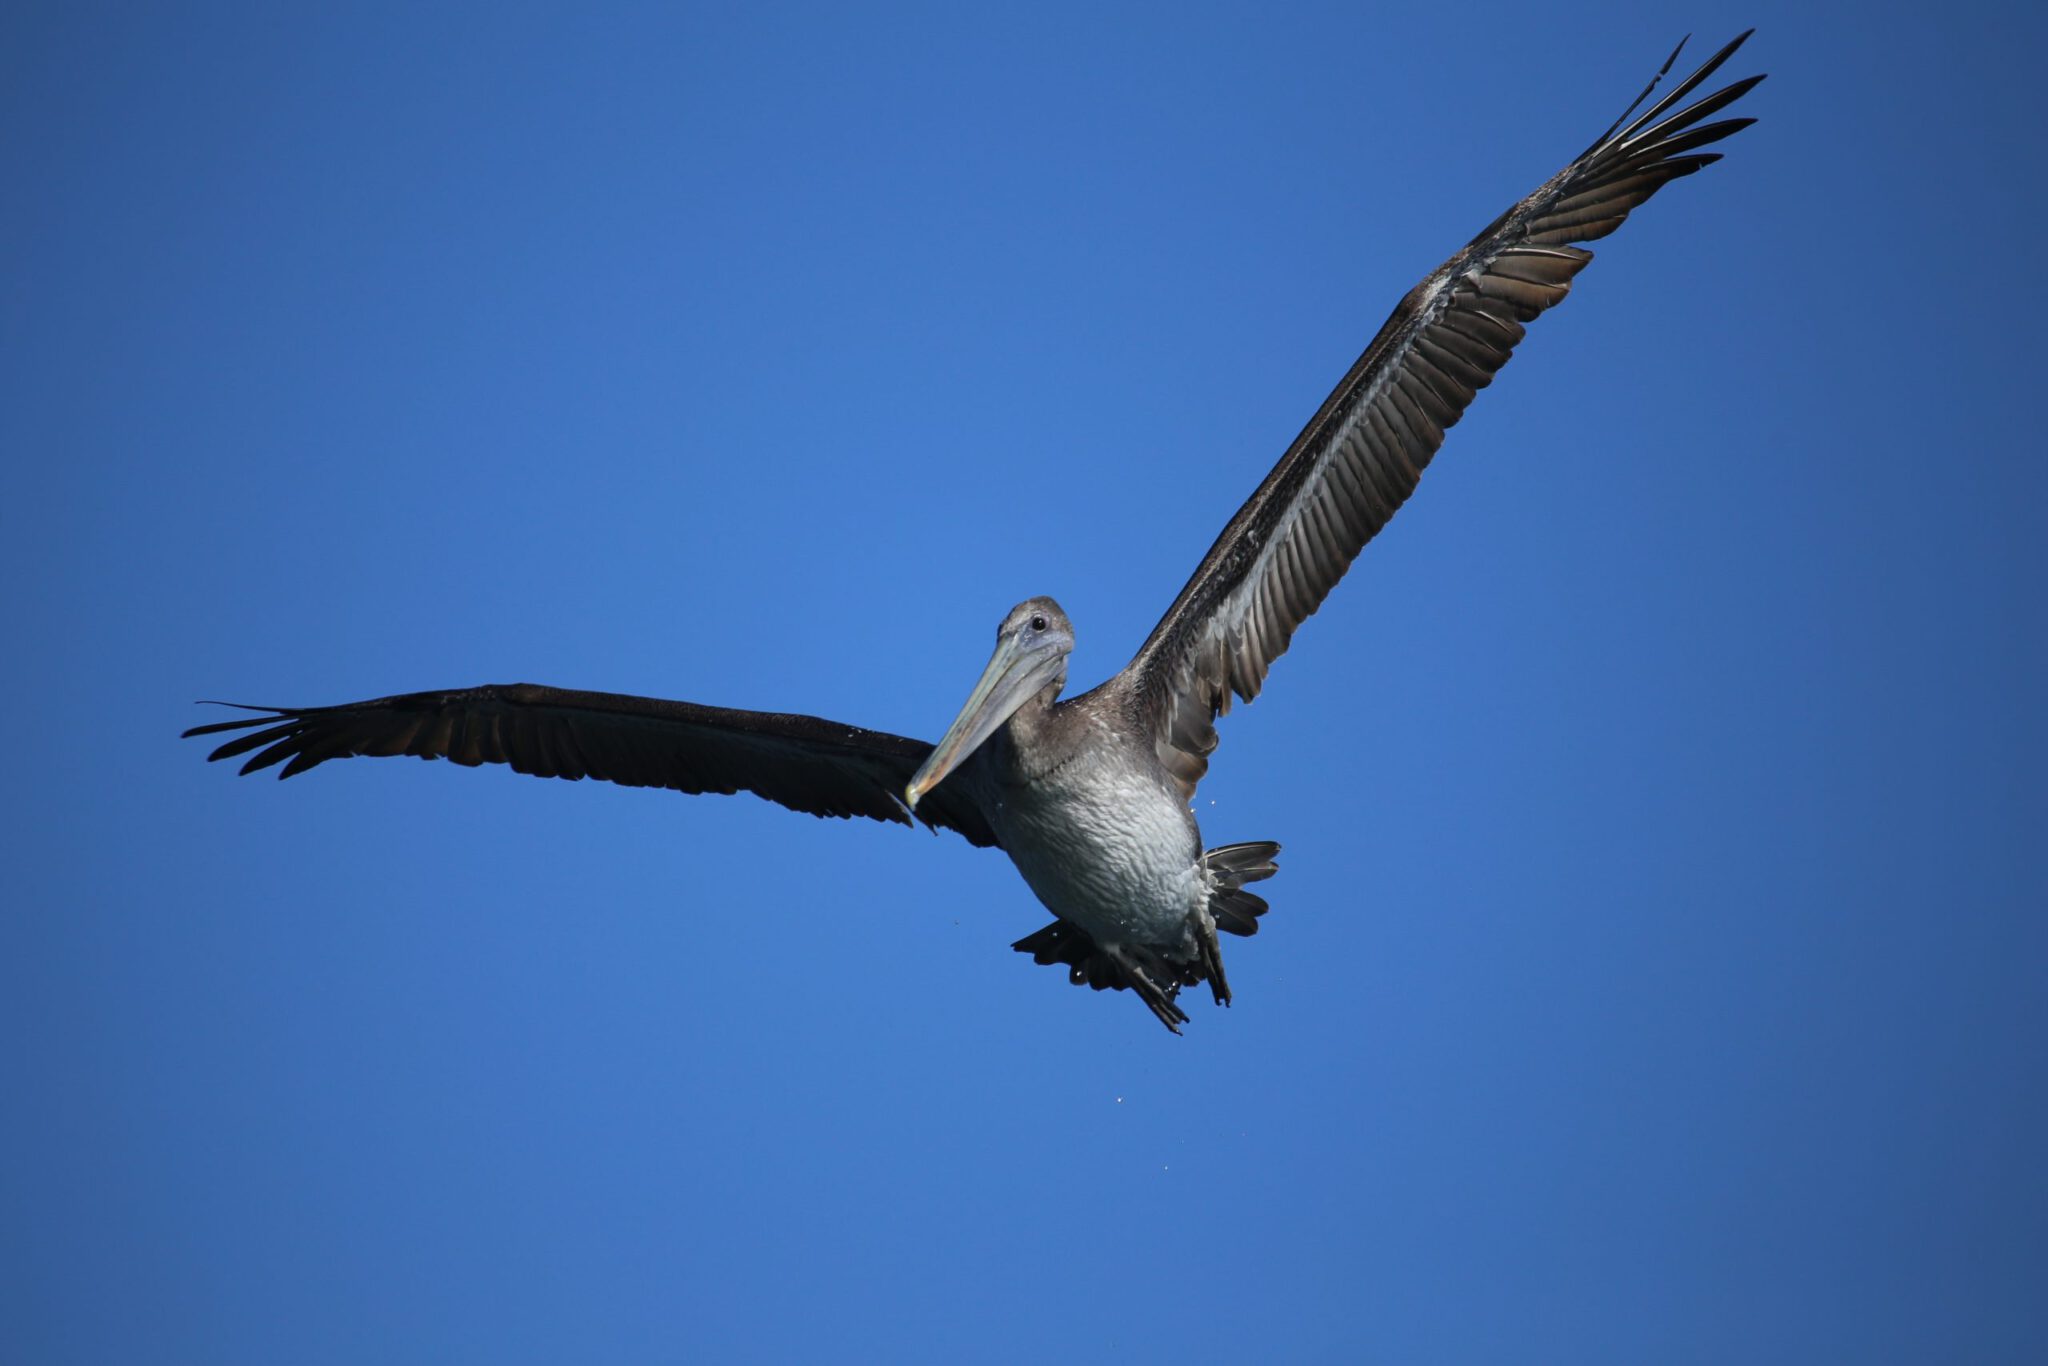 A single brown pelican in La Jolla flies against a blue sky with large wings outstretched